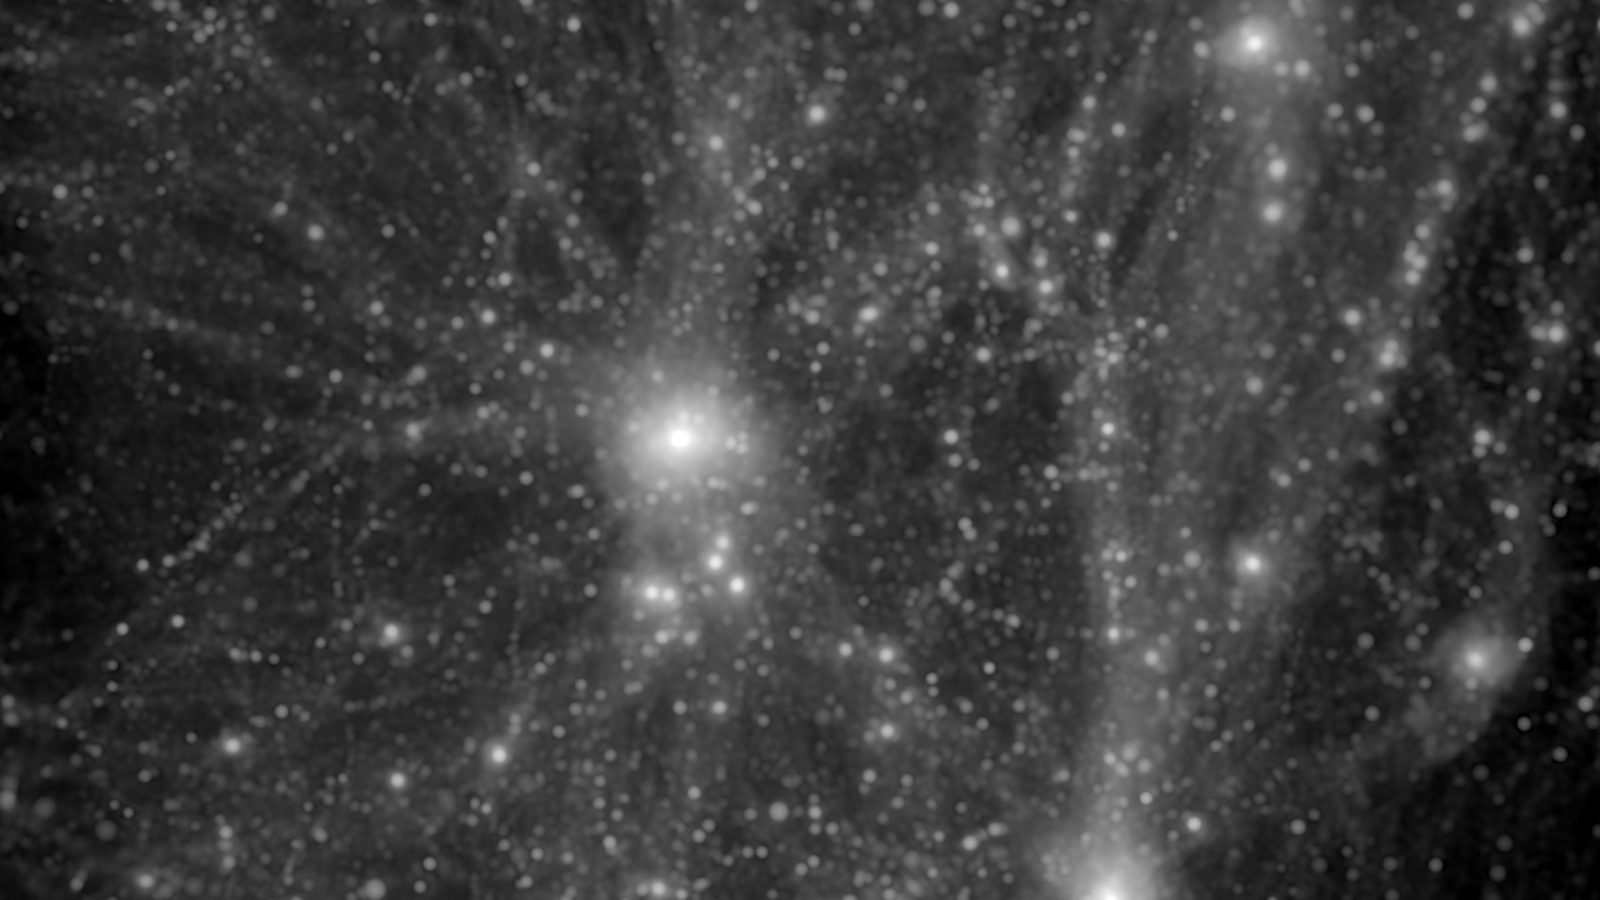 Black and white still from a simulation of galaxies forming 